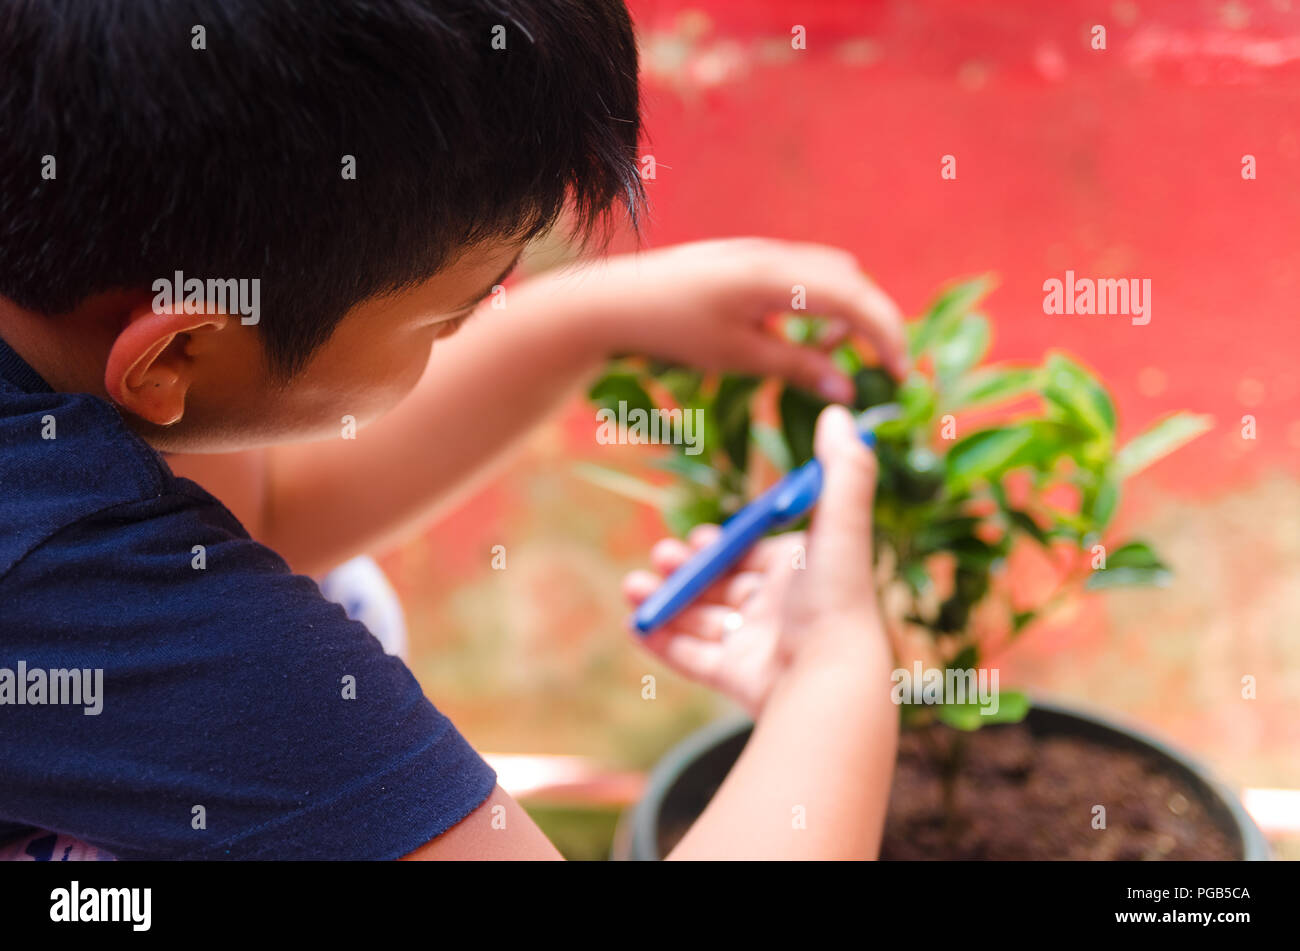 Young boy harvesting calamansi fruit from a home garden Stock Photo